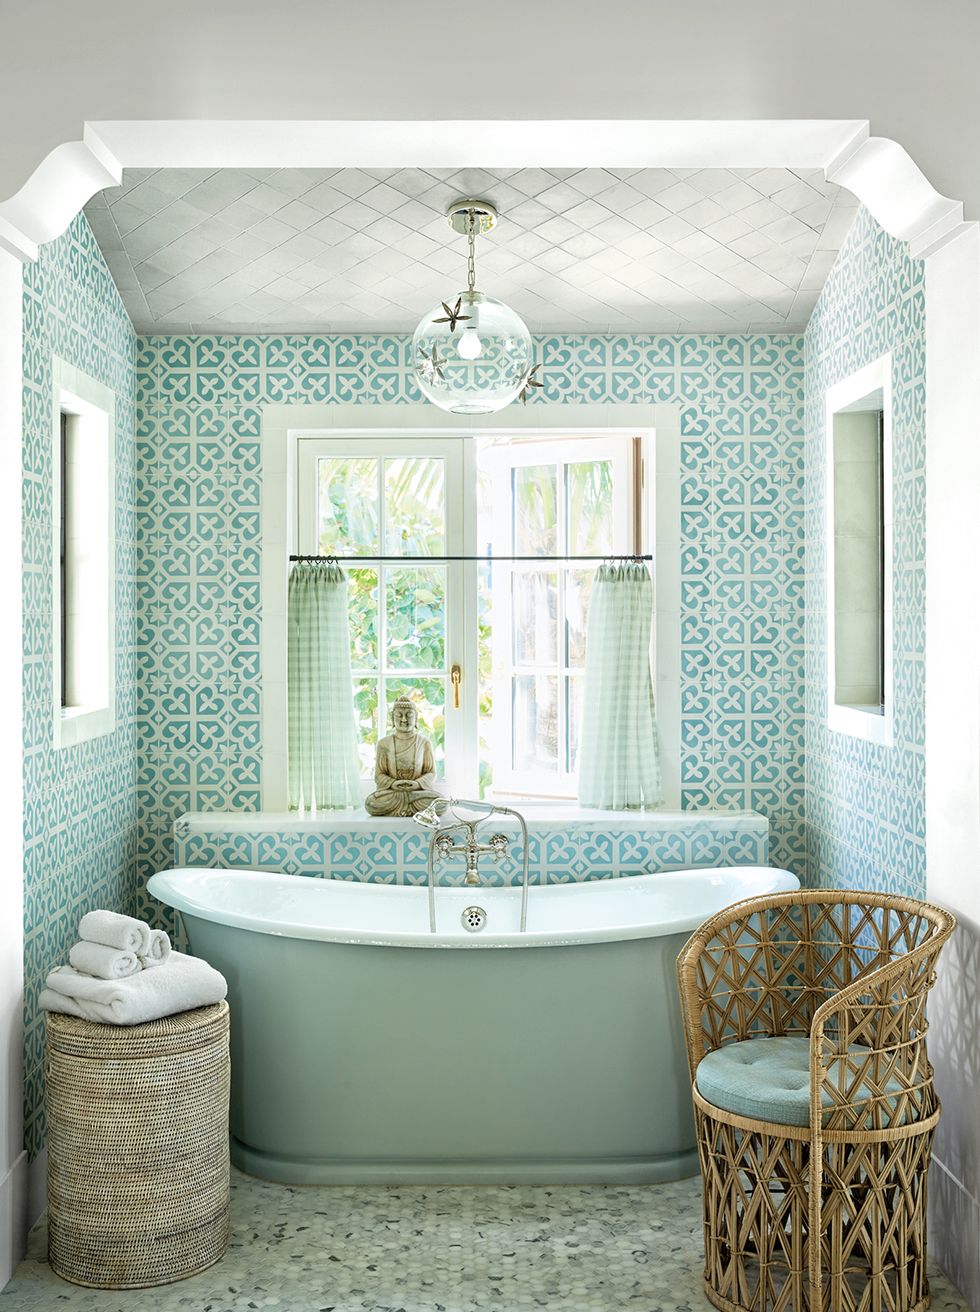 Breathtaking aqua tile and luxurious freestanding tub in a coastal home with interior design by Tom Scheerer. Photo by Francesco Lagnese - source: Elle Decor.